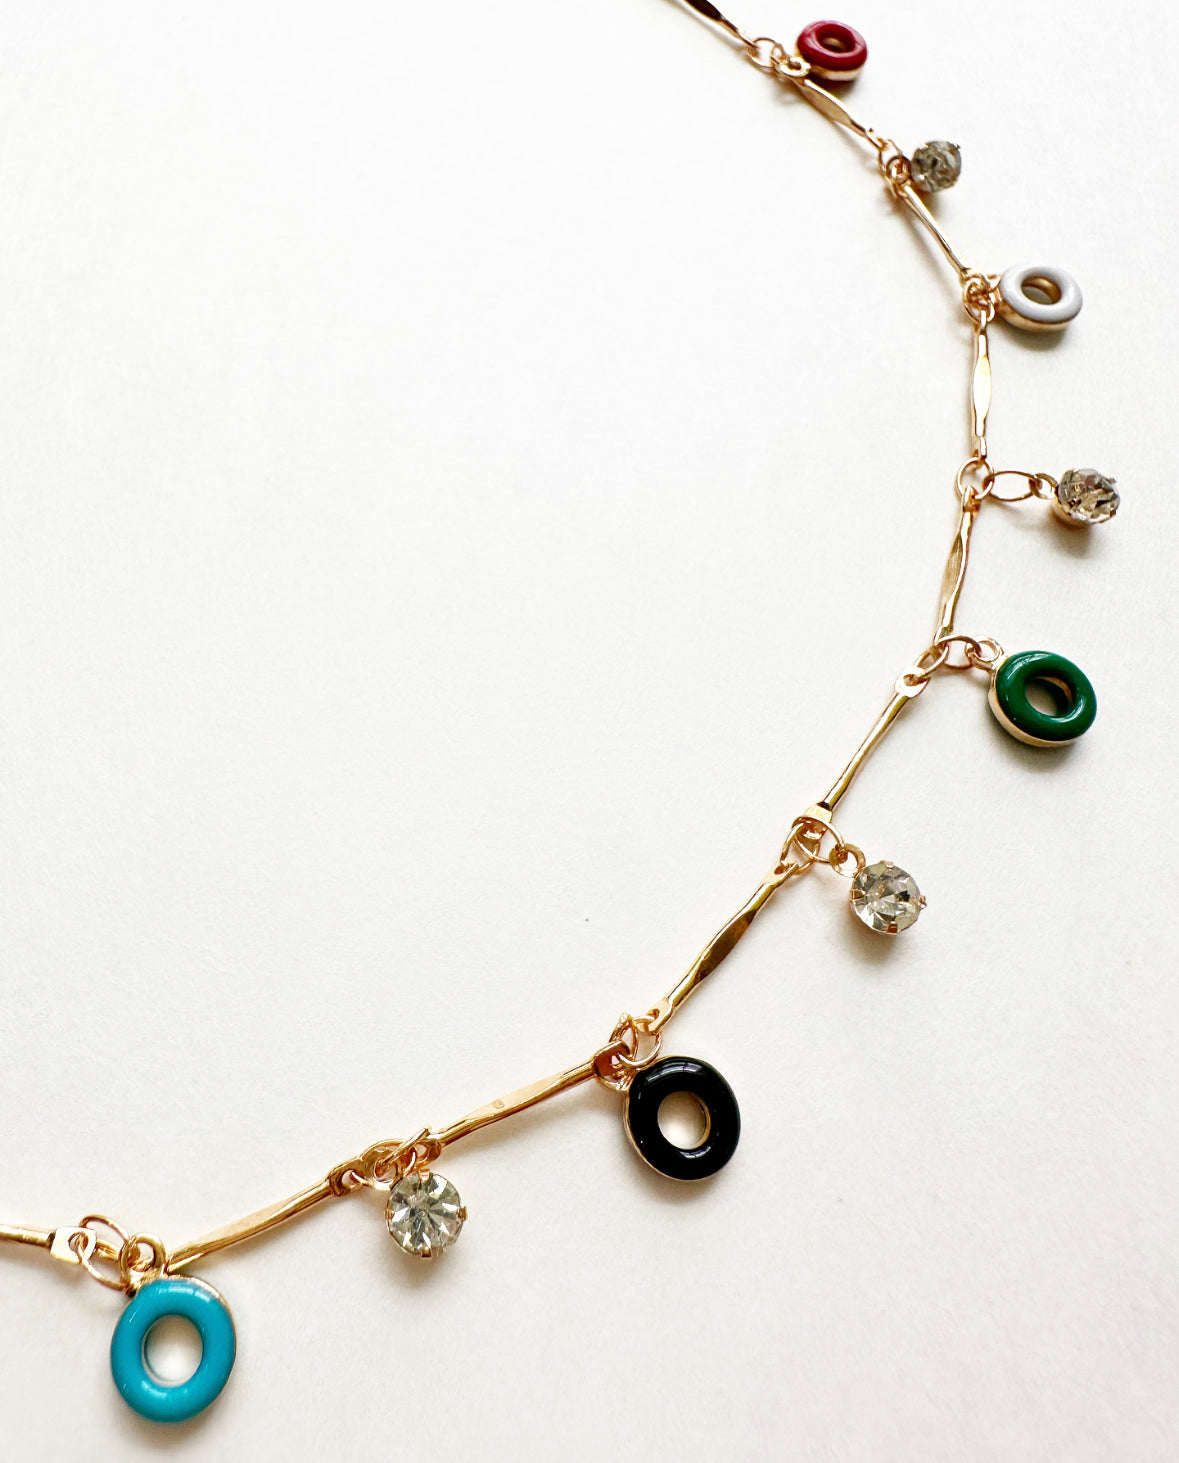 Close-up of rhinestone and charm details on Confection Choker Necklace.